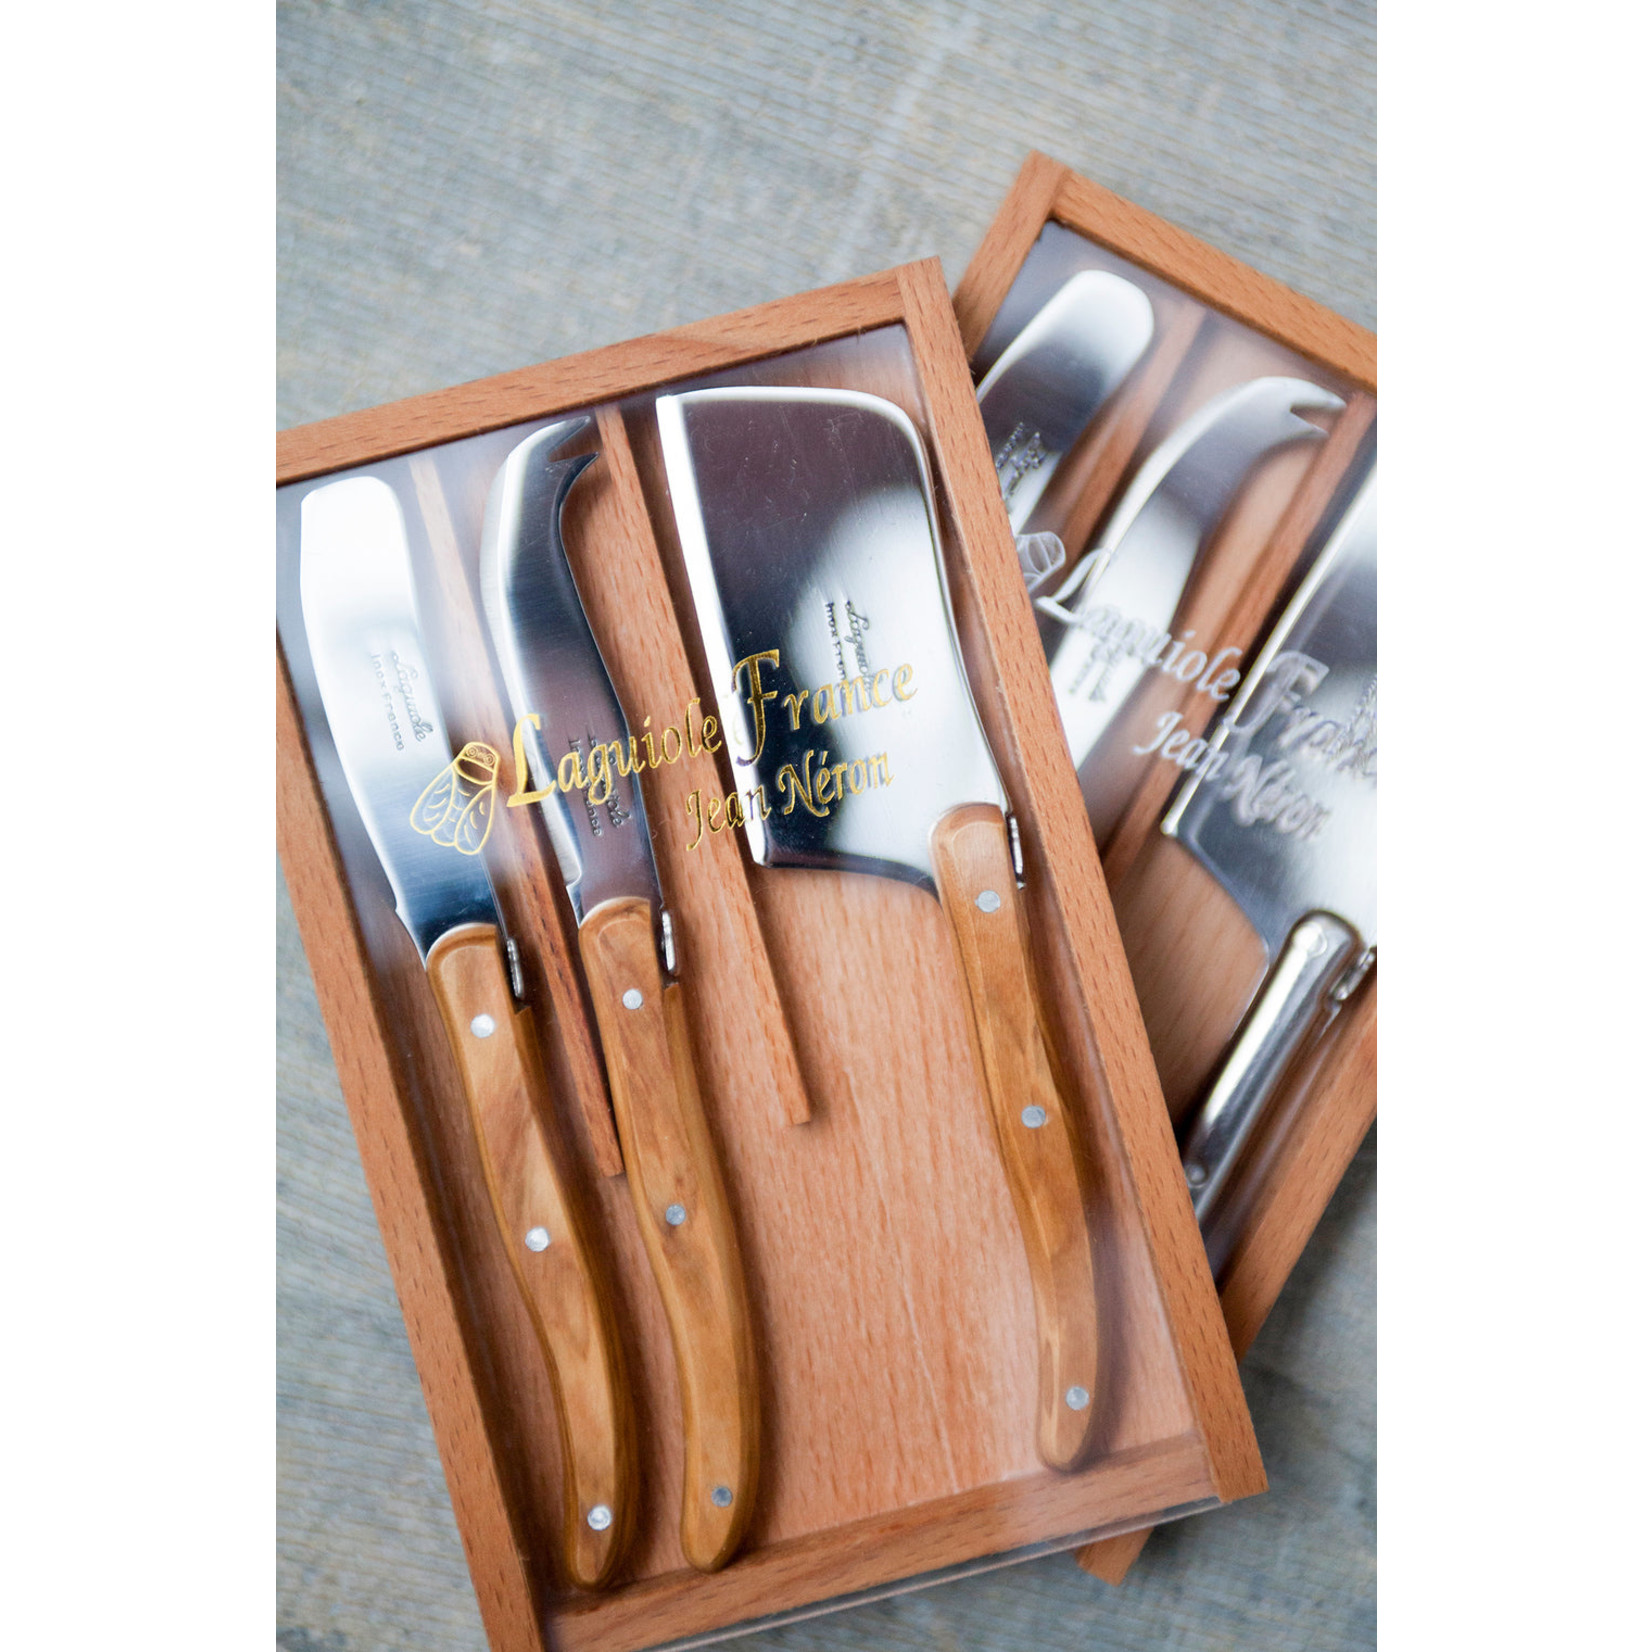 Laguiole Set of Three Olivewood Cheese Utensils in Wooden Box